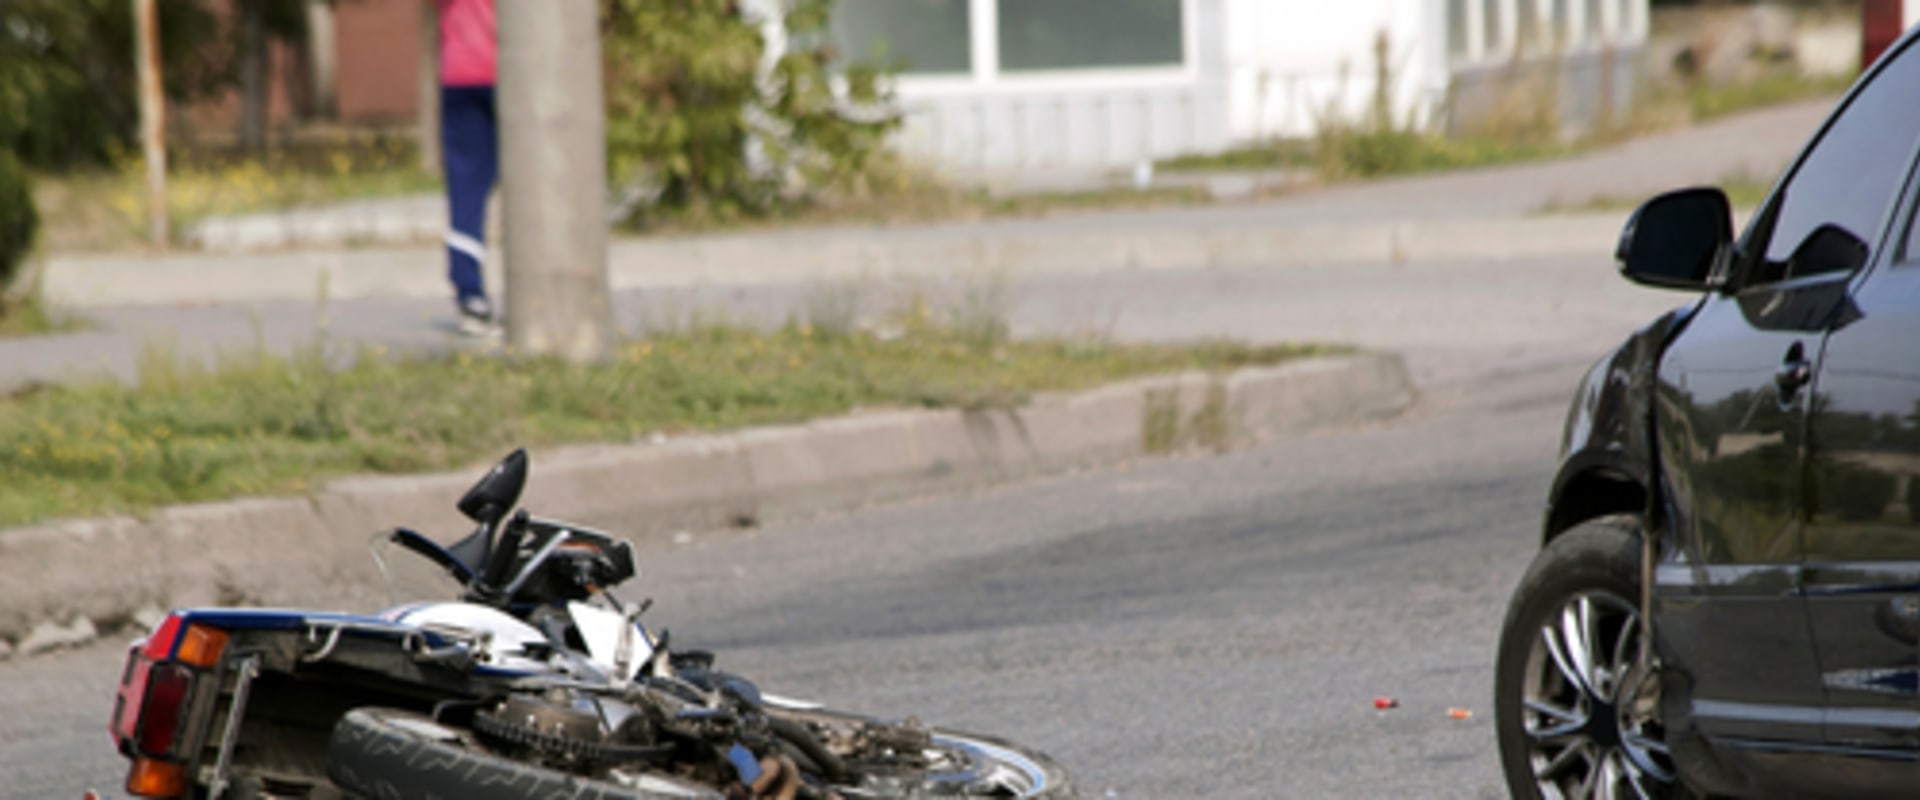 Motorcycle Accident Claims for Rear End Collision